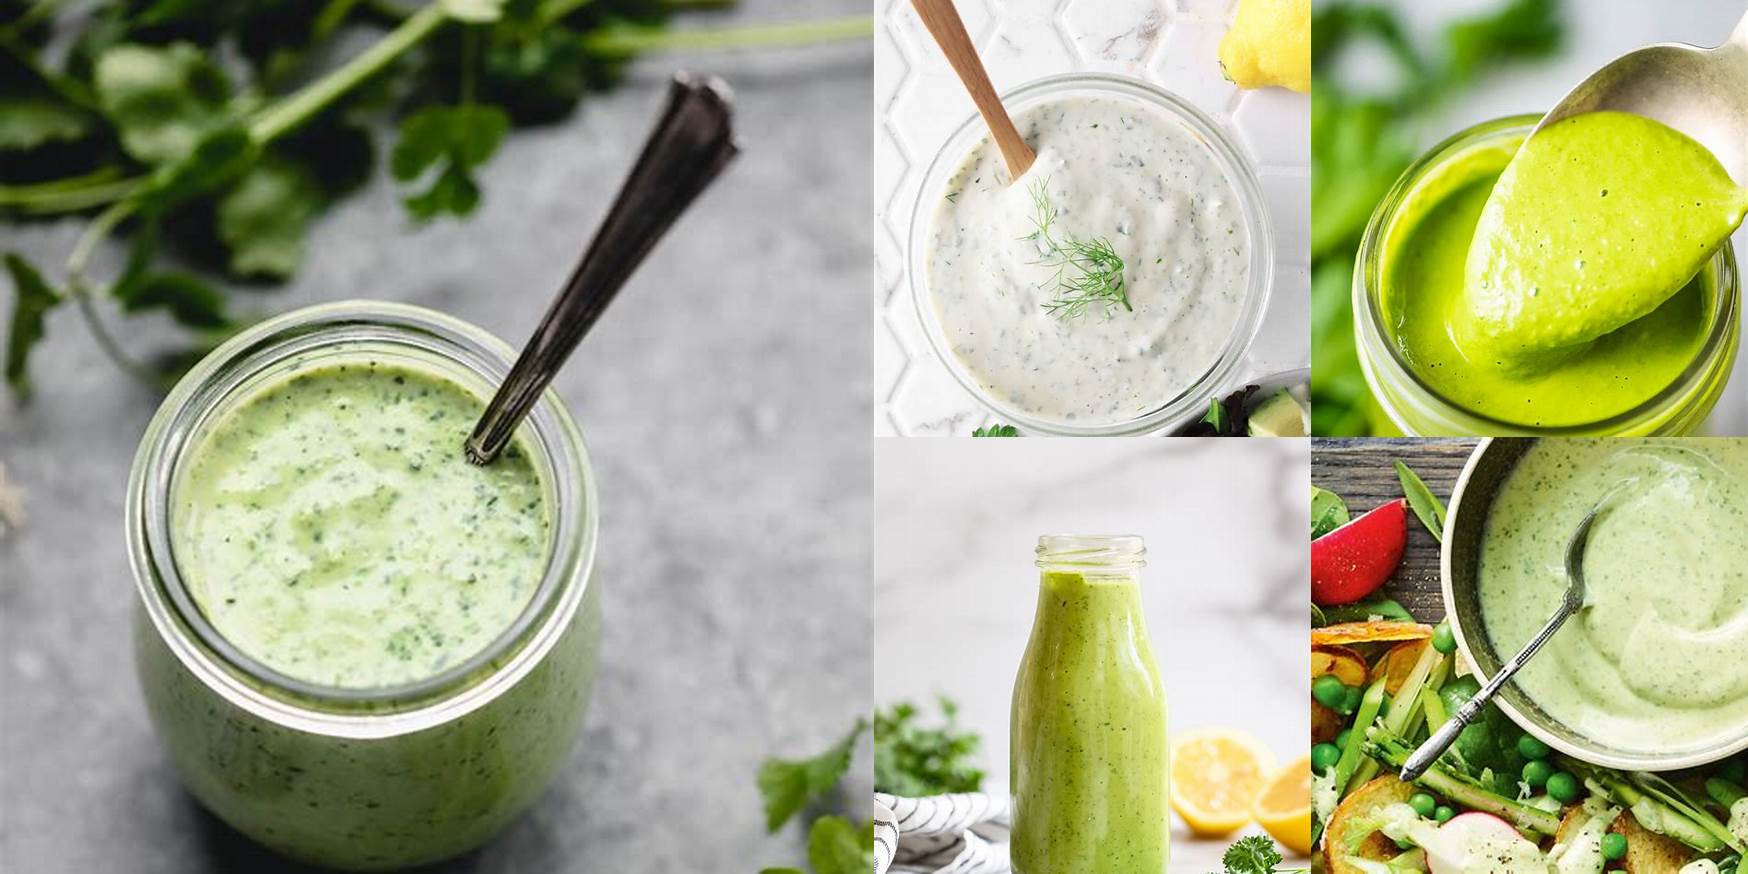 Does Green Goddess Dressing Have Dairy